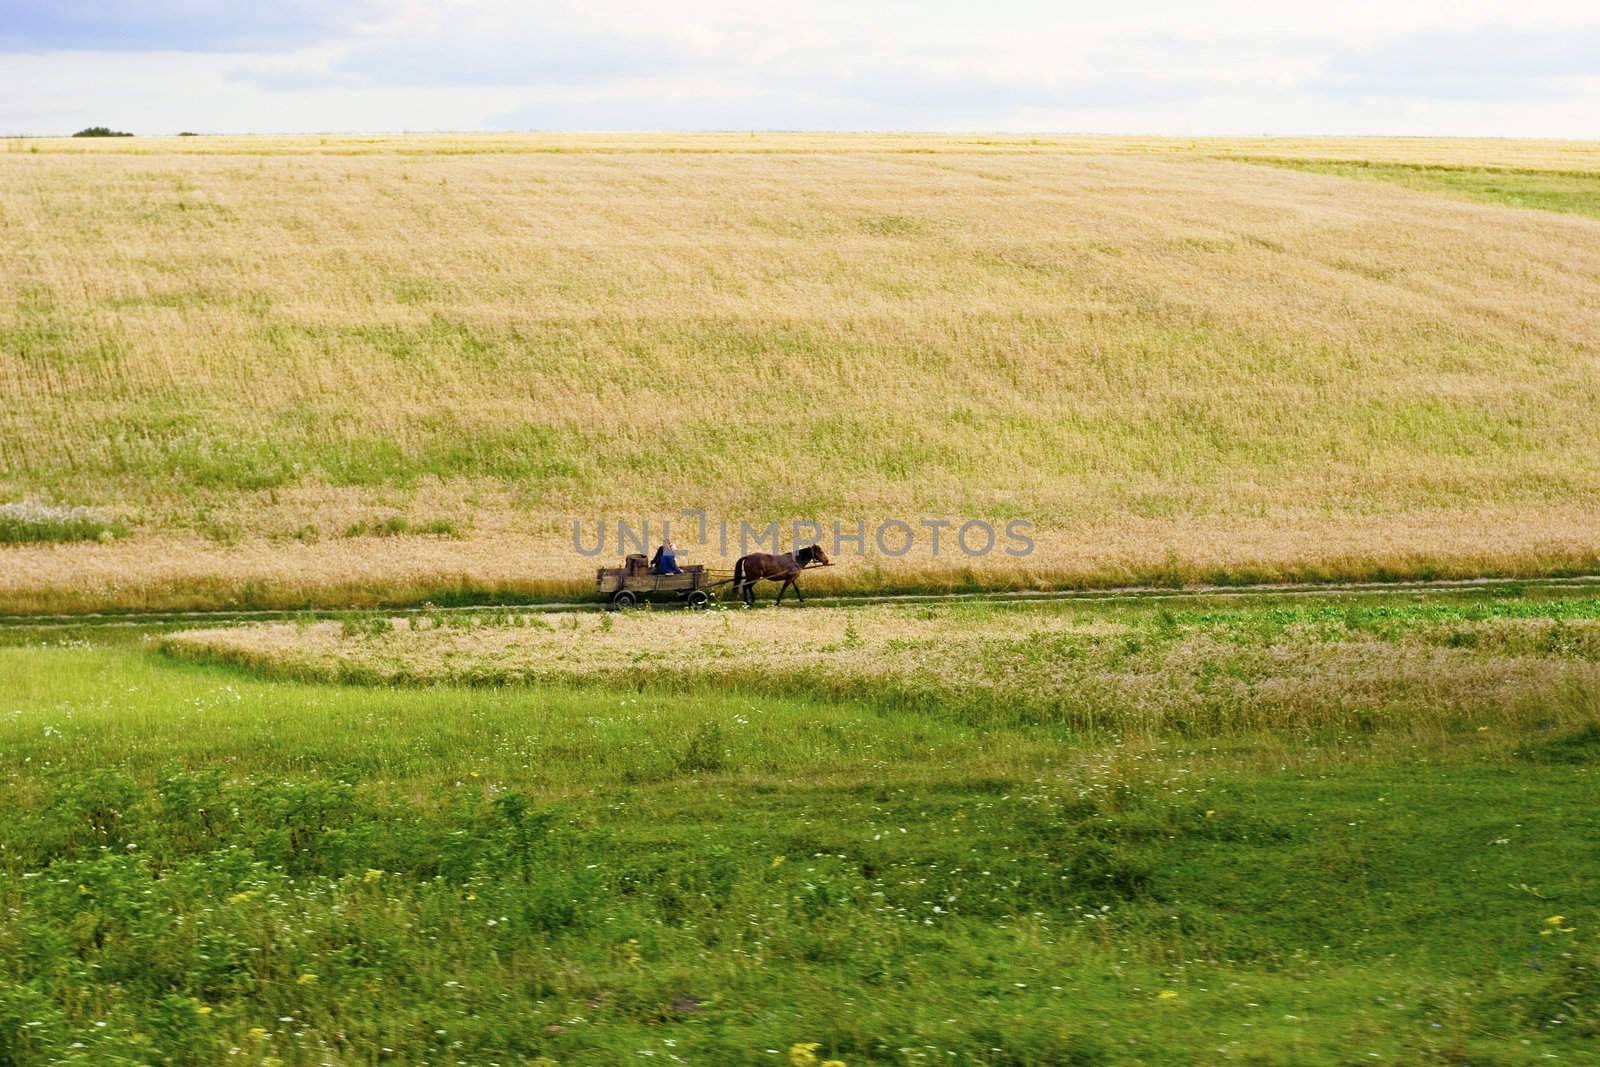 Woman going on cart at rural area. Summer's landscape. Russia.